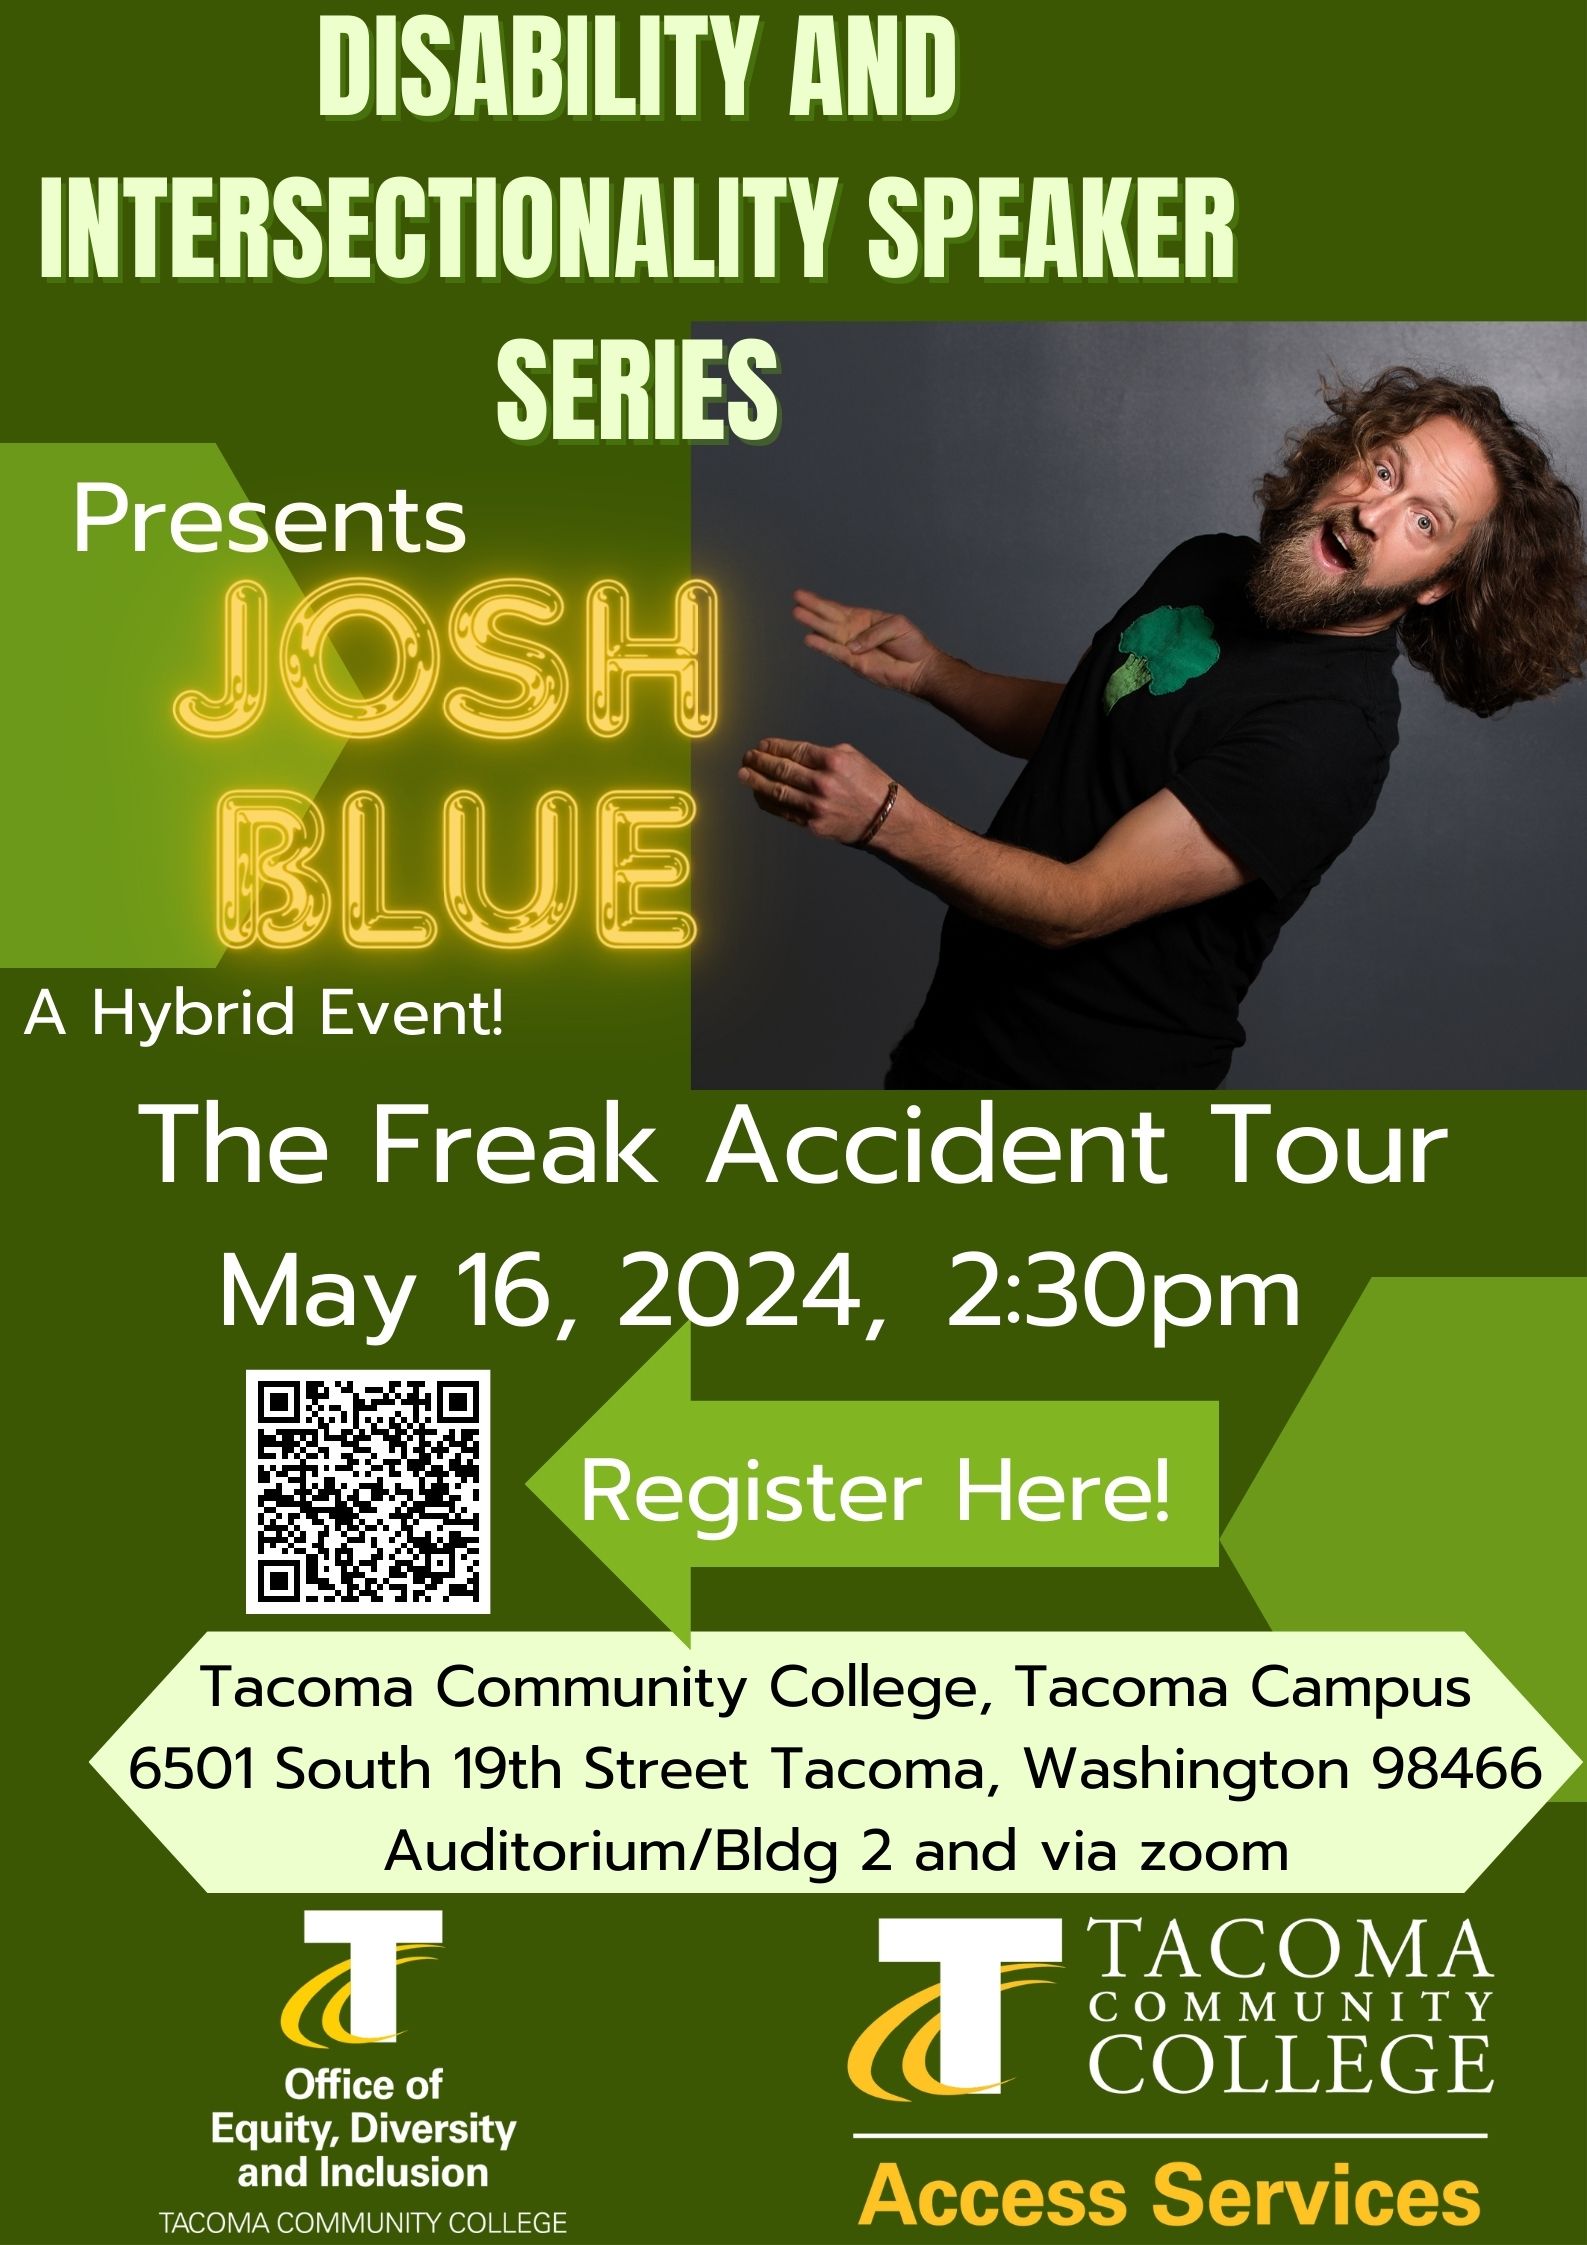 The flyer is green and yellow. There is a photo of Josh Blue in the top right-hand corner of the flyer. It reads: Josh Blue from Thursday, May 16th at 2:30pm (PST) The Freak Accident Tour. It includes a QR code to register online.    